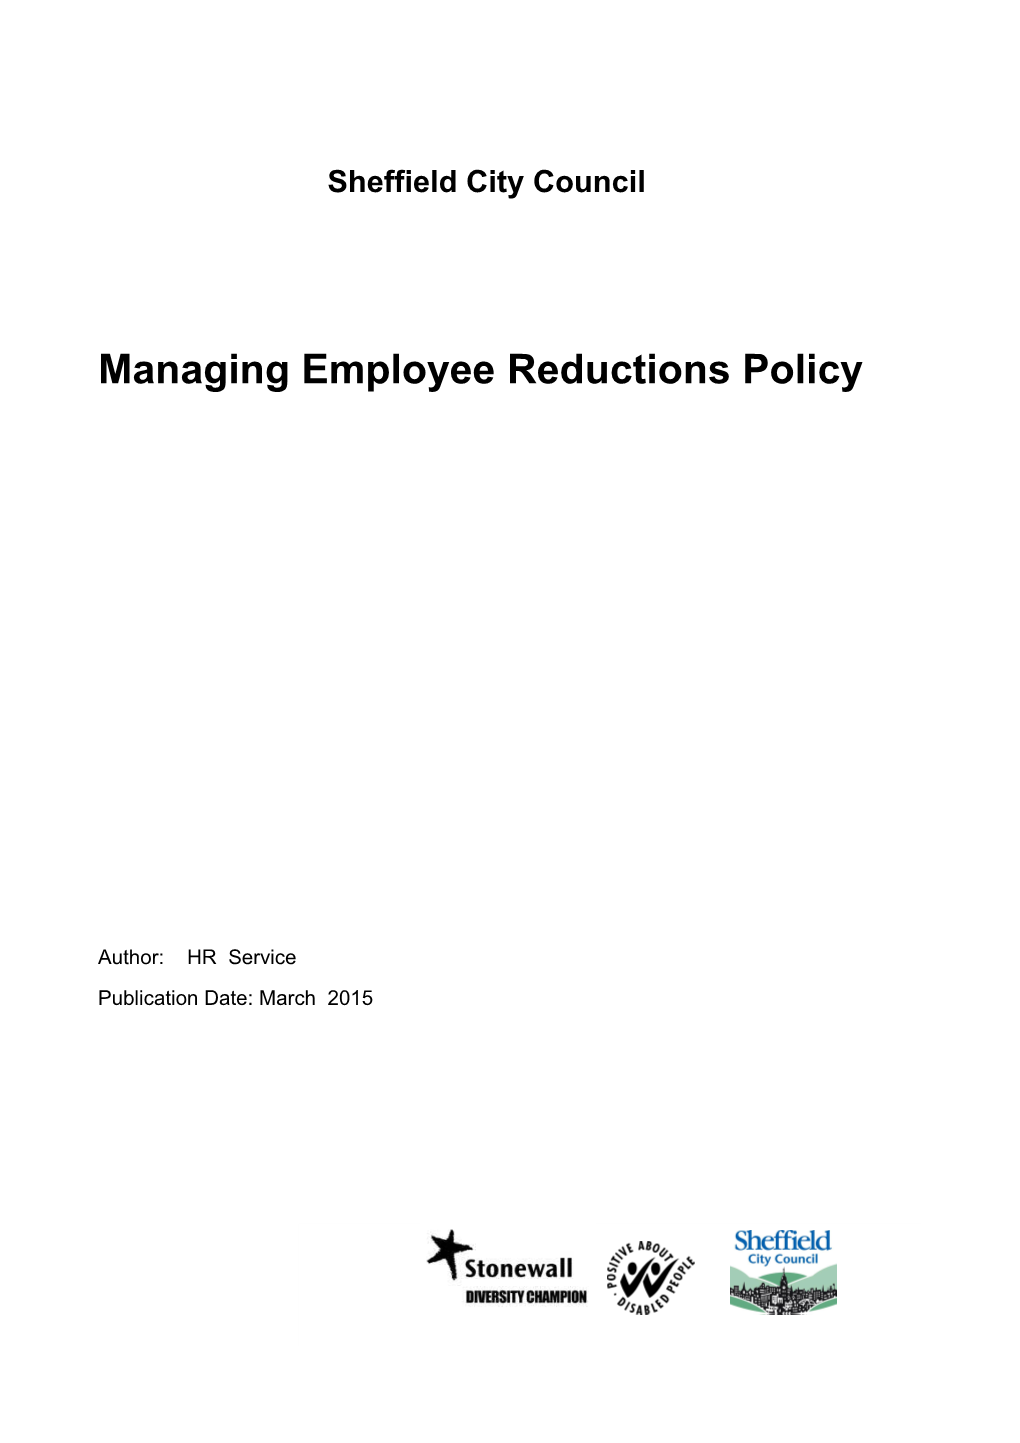 Managing Employee Reduction Policy and Procedure